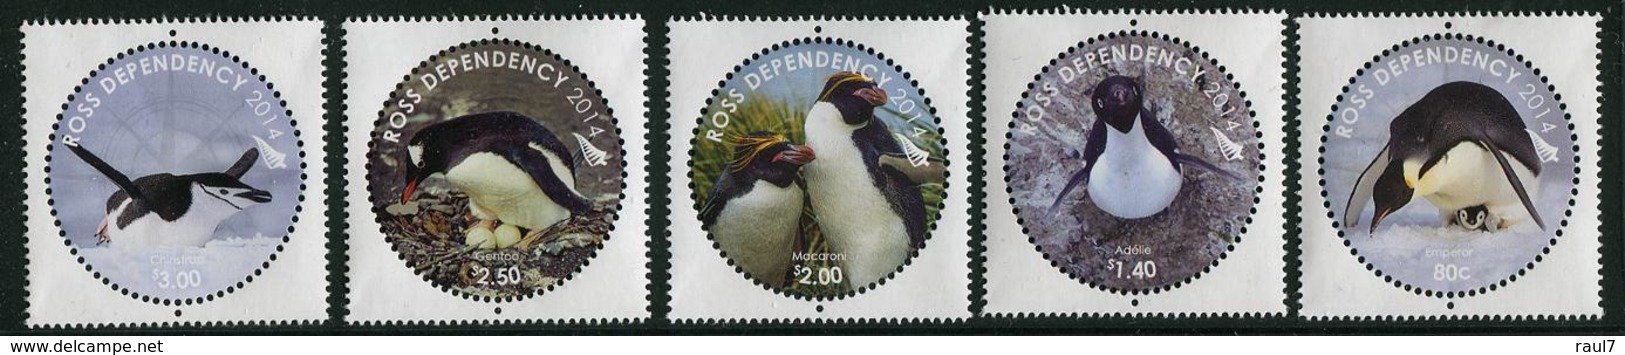 ROSS Dependency 2014 - Faune, Pingouins - 5 Val Neufs // Mnh Set - Unused Stamps